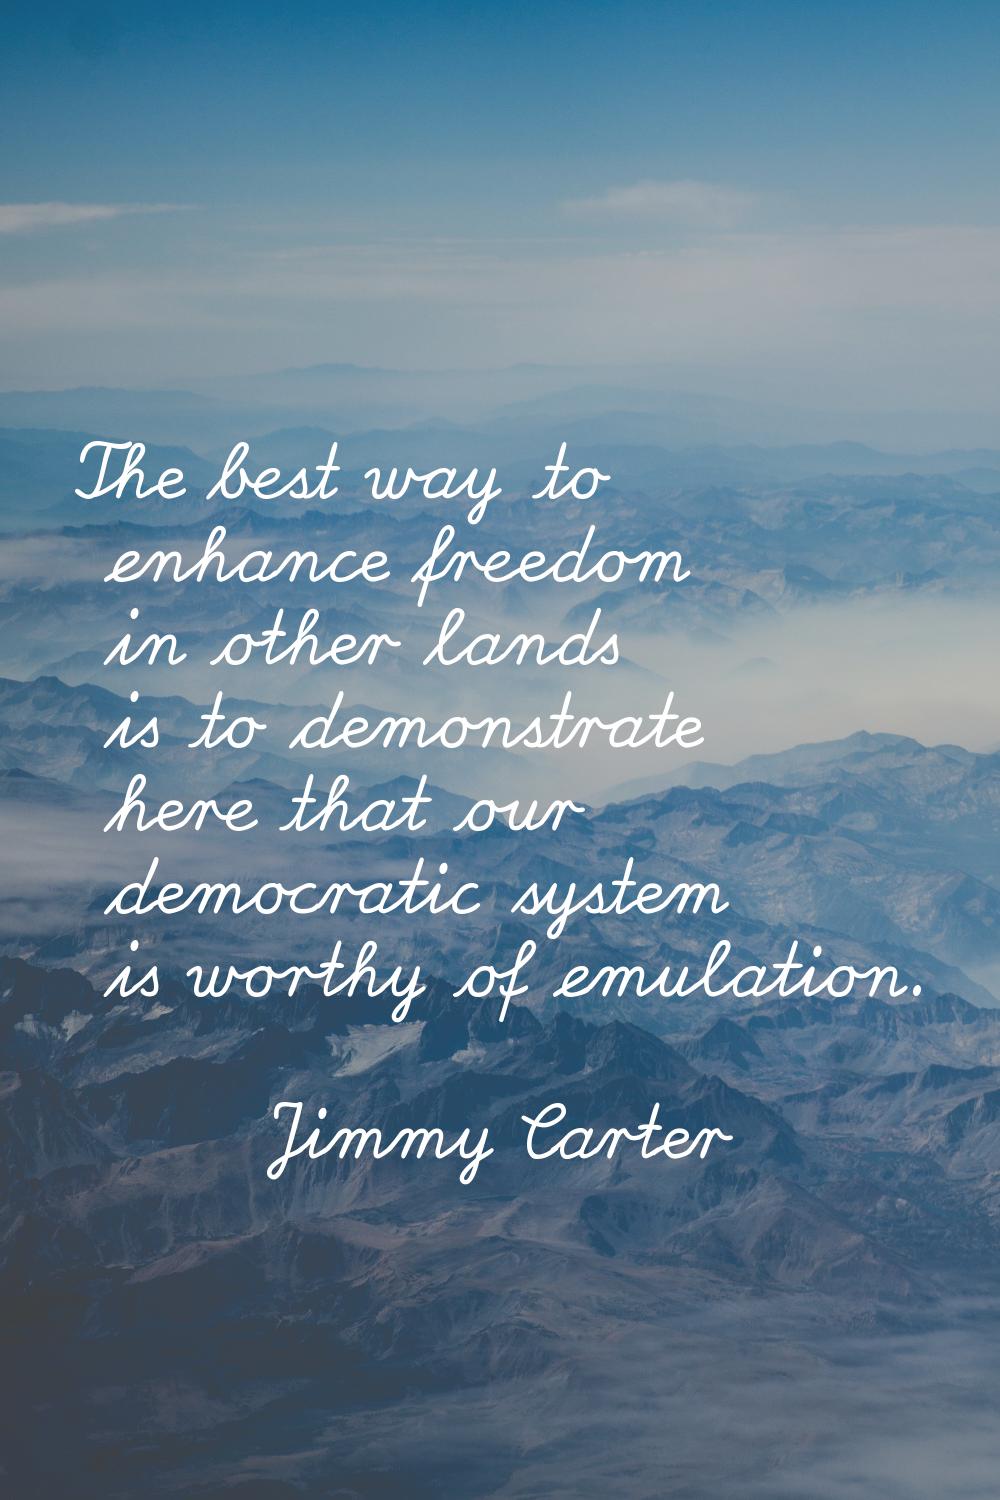 The best way to enhance freedom in other lands is to demonstrate here that our democratic system is